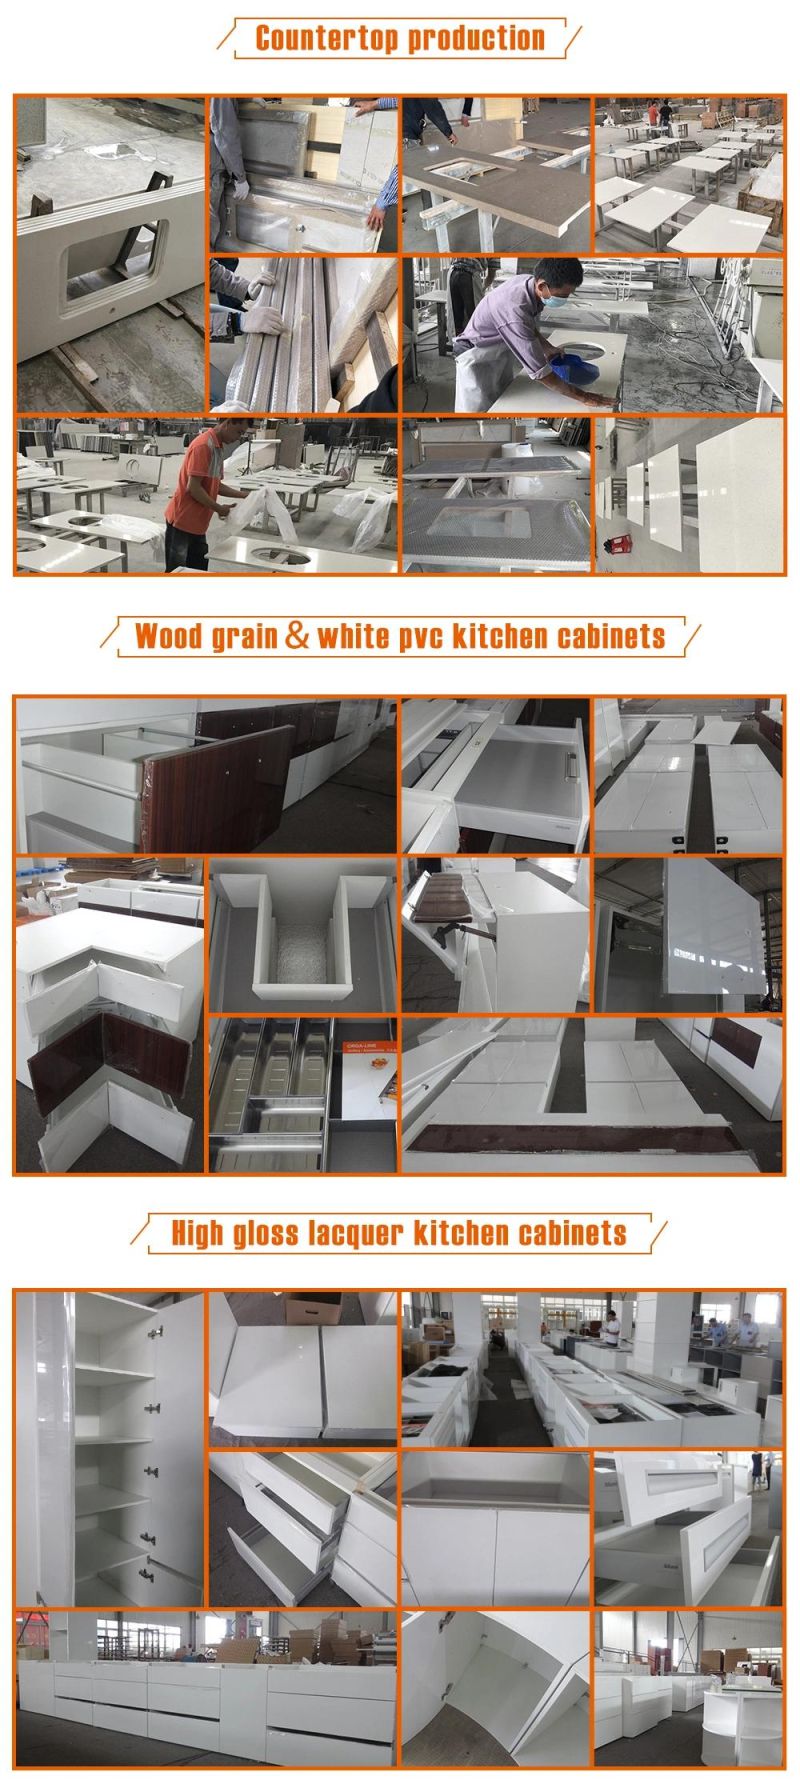 Classic Style High Quality Practical Waterproof MDF Laminate Kitchen Cabinet